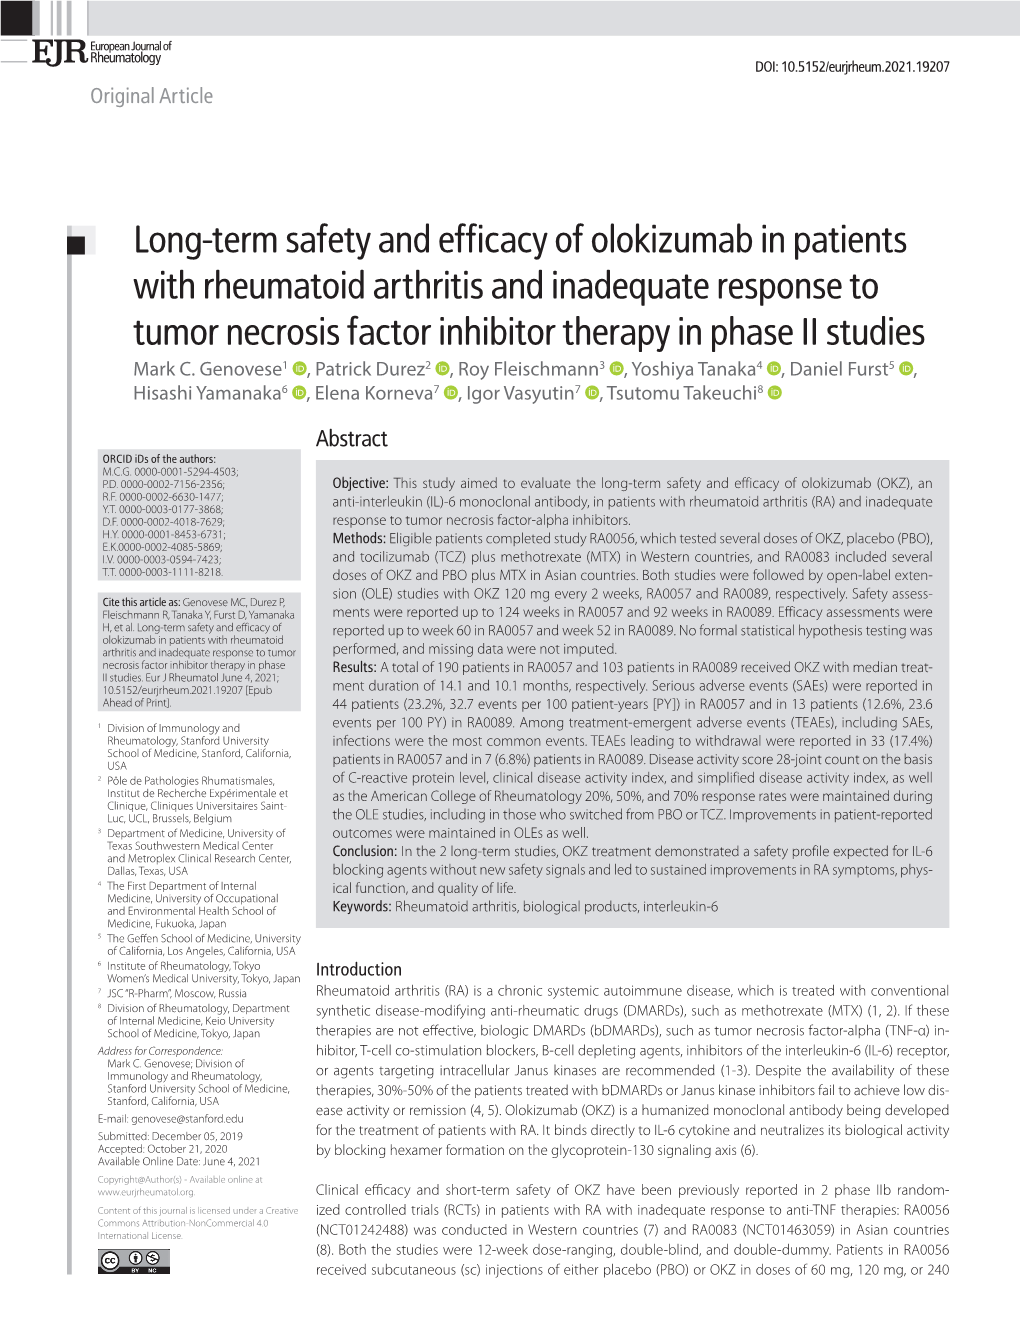 Long-Term Safety and Efficacy of Olokizumab in Patients With